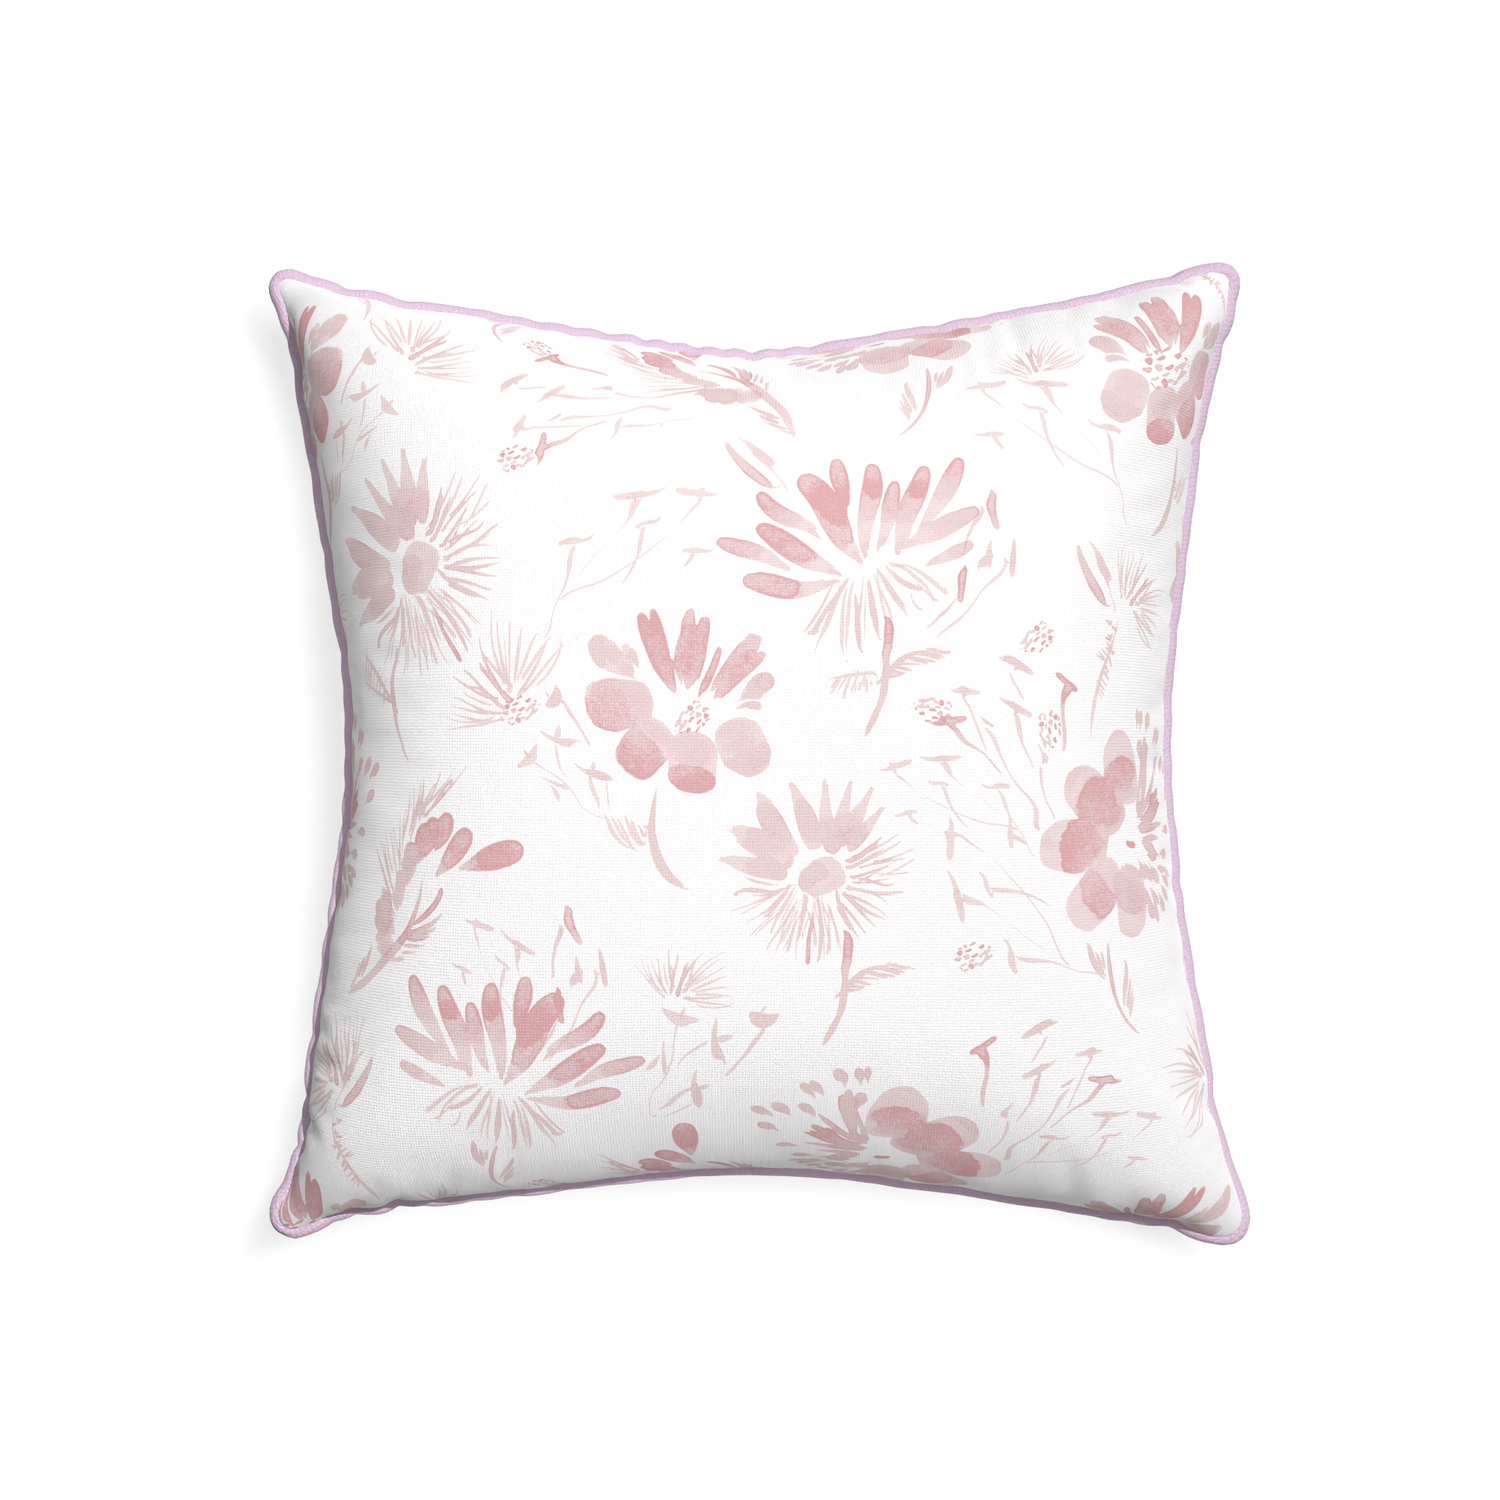 22-square blake custom pink floralpillow with l piping on white background